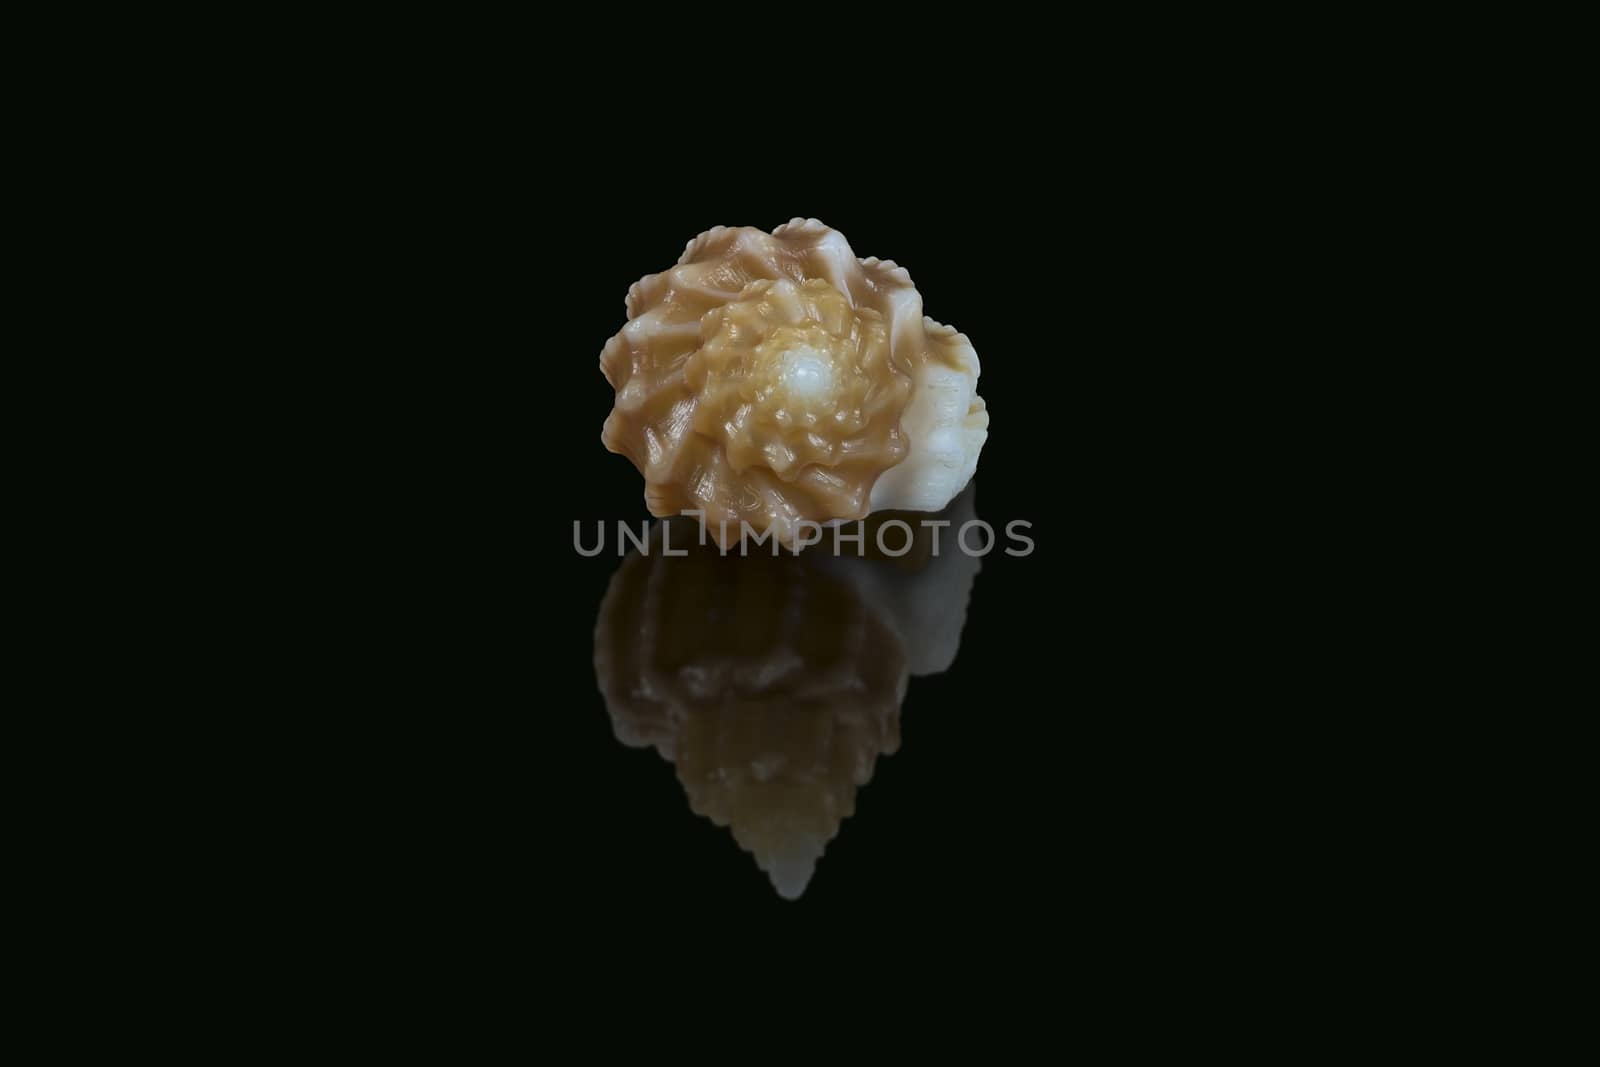 Side view of Shell of Scalptia bicolor or Trigonostoma bicolor on black background. It is a marine gastropod mollusk in the family of Cancellariidae, genus of sea snails. L1,8xW1,2x0H0,9 cm